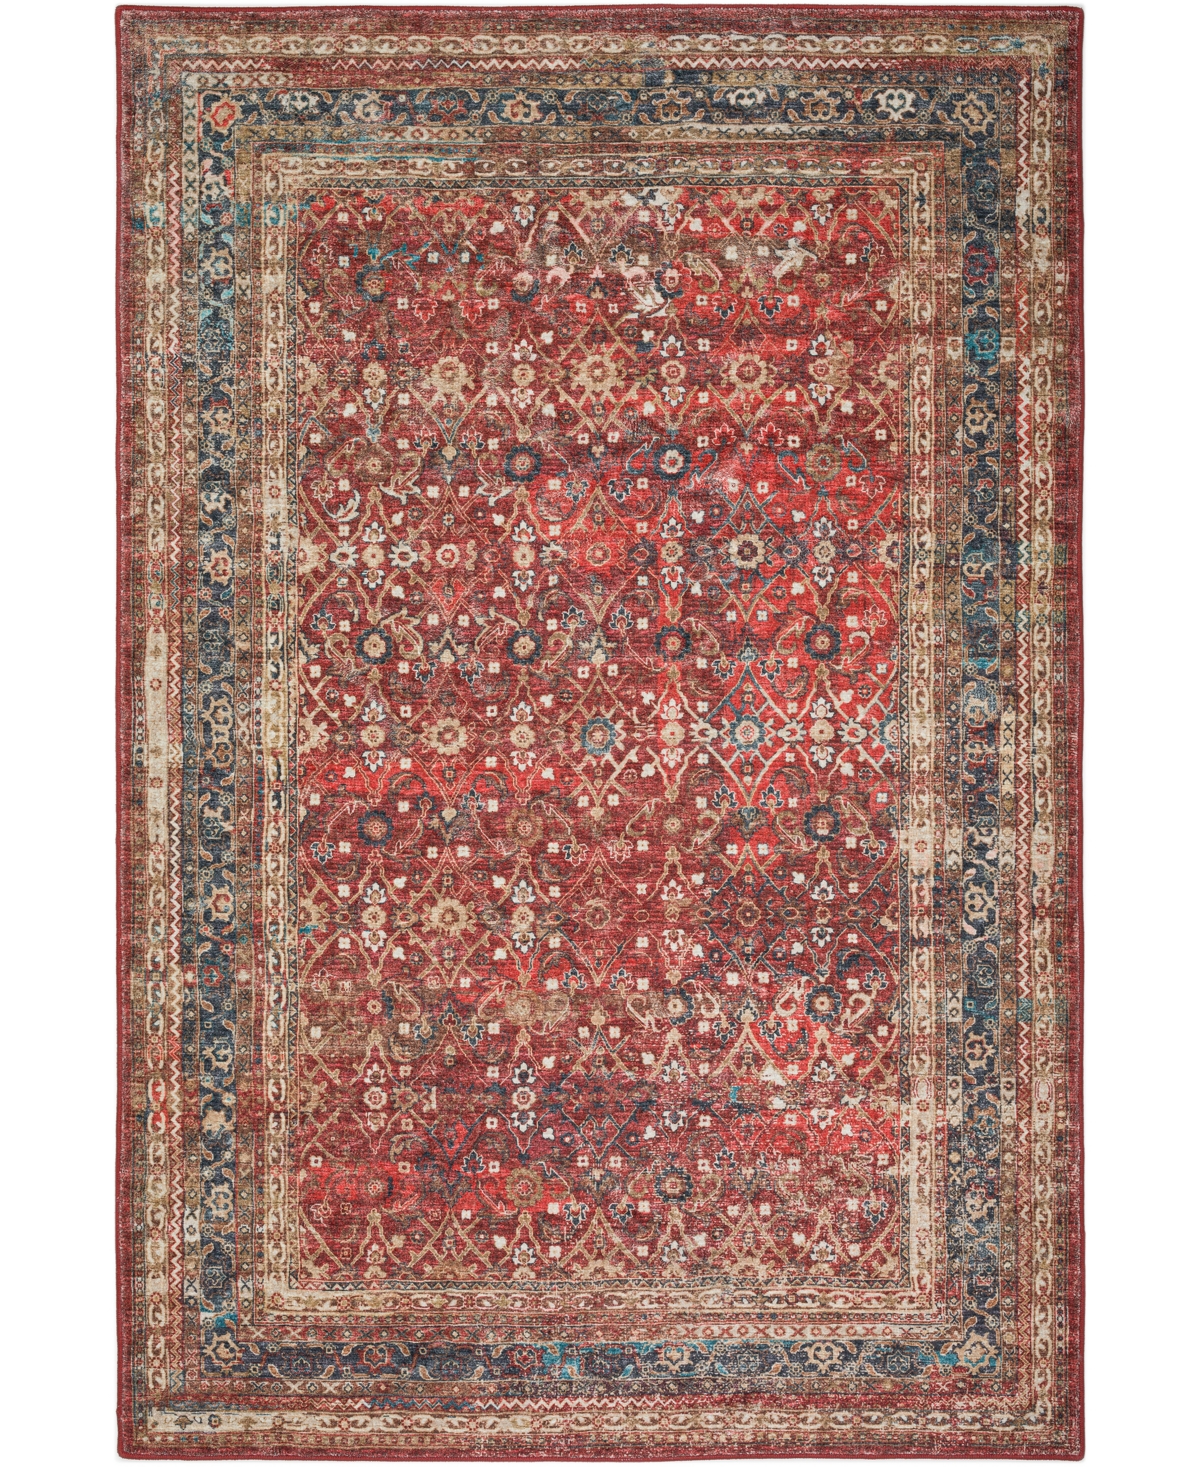 D Style Basilic Bas7 5' X 7'6" Area Rug In Red